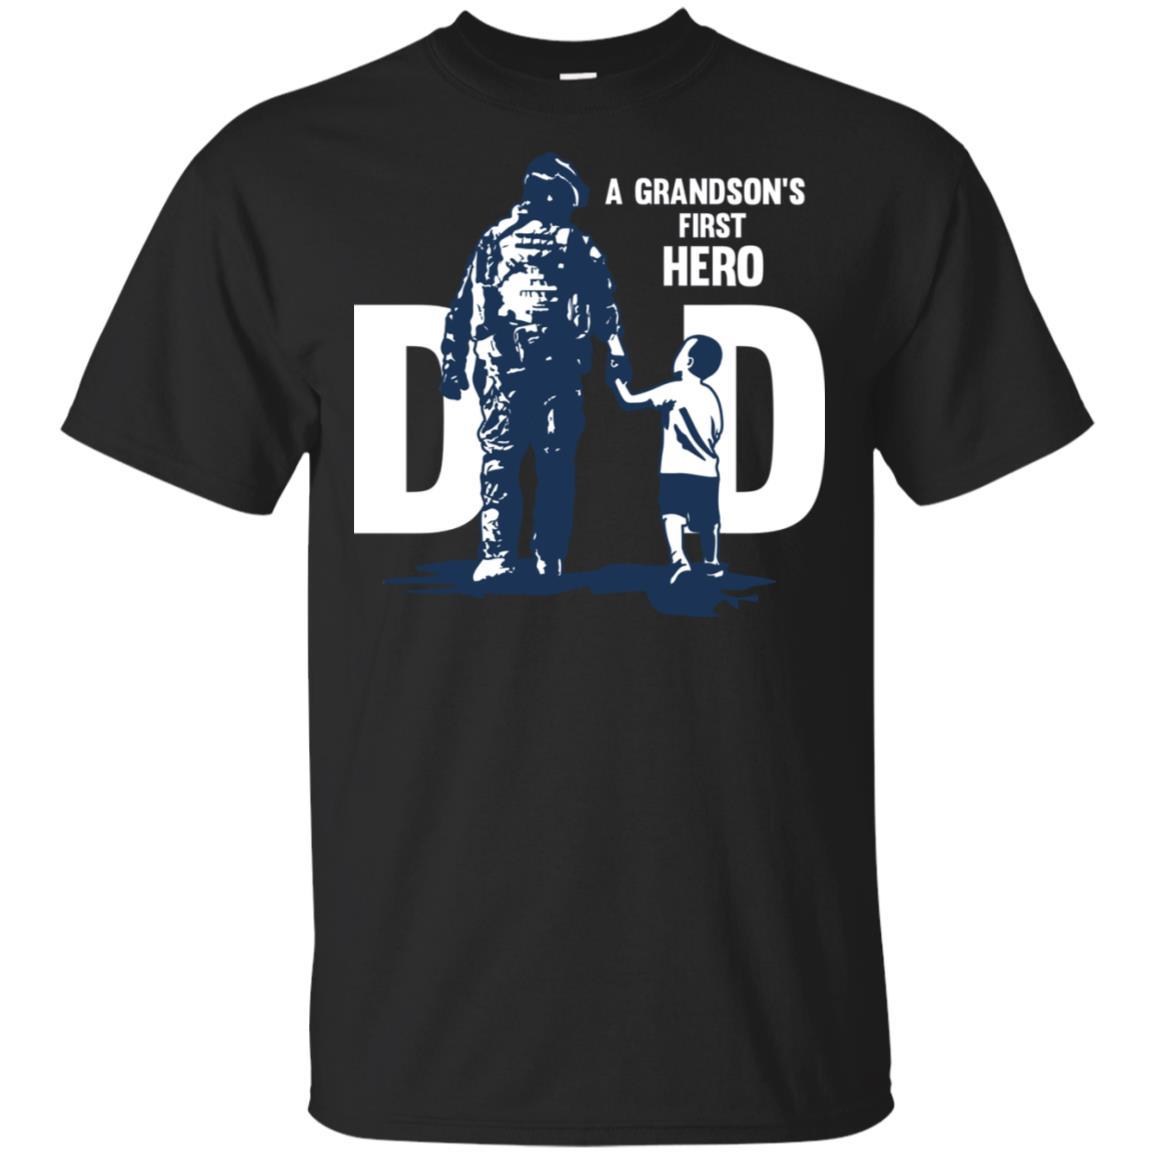 Military T-Shirt "A GRANDSON'S FIRST HERO FIRST LOVE DAD On" Front-TShirt-General-Veterans Nation